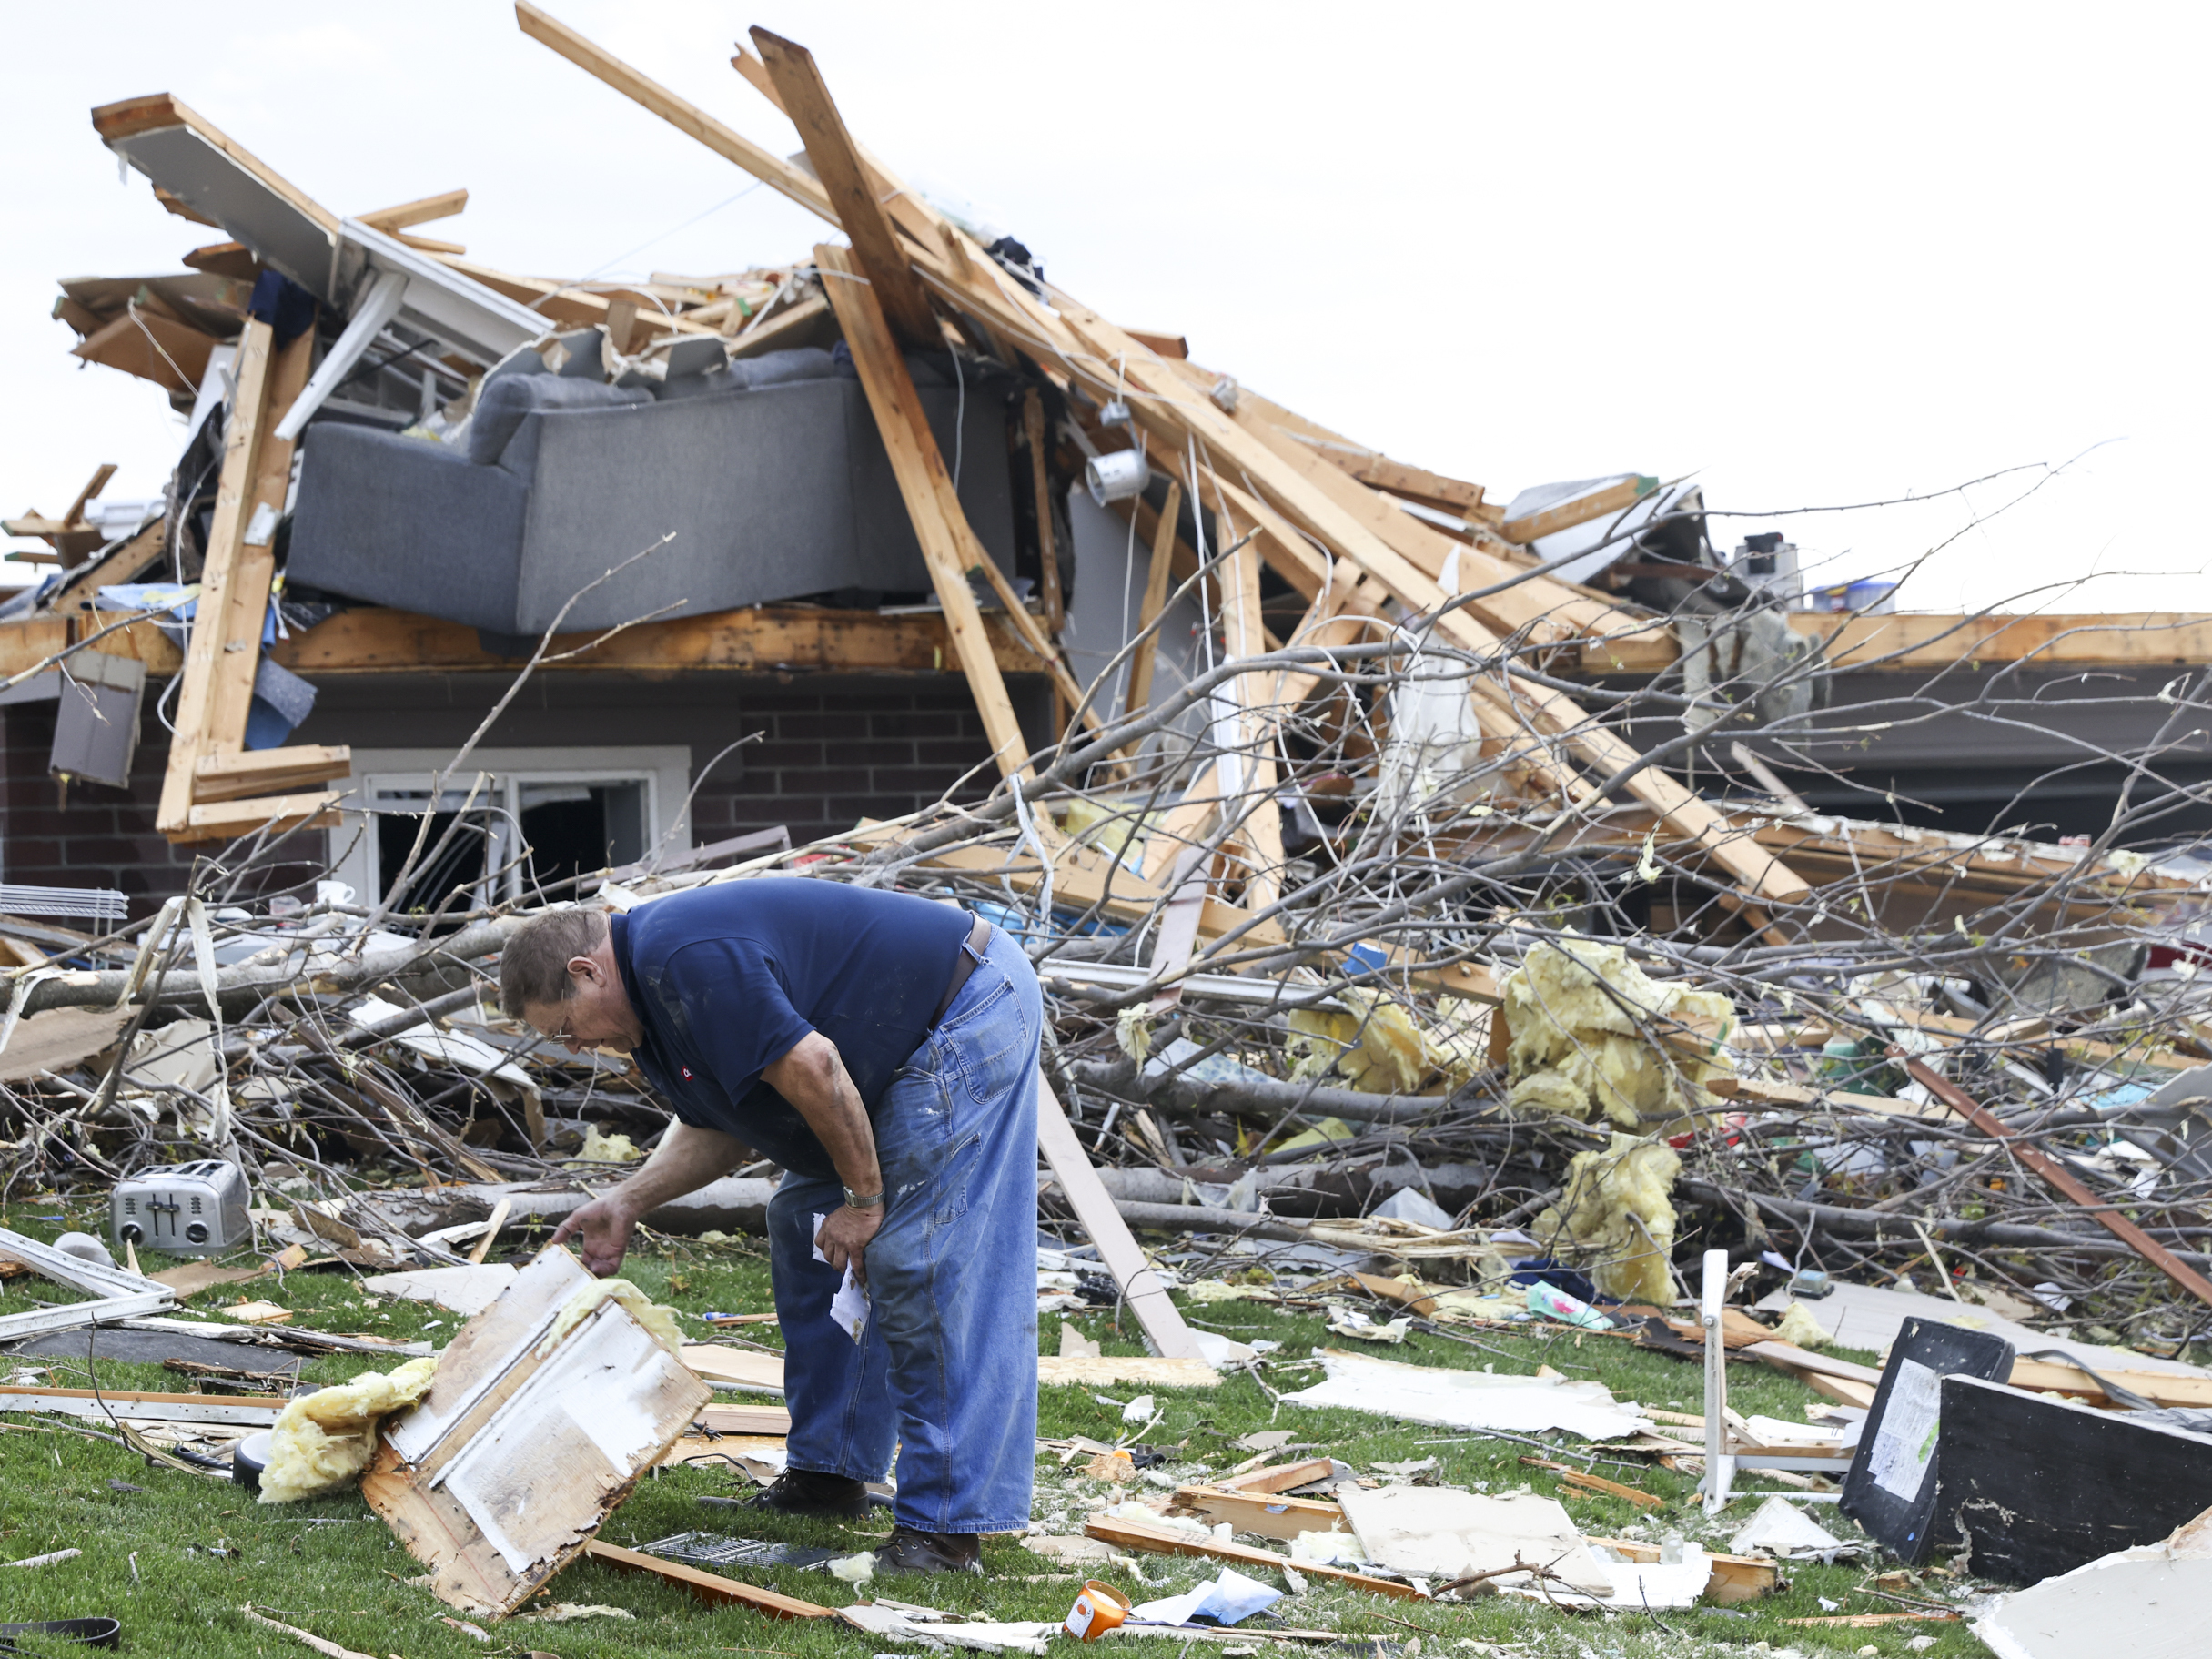 Residents assess tornado damage in Nebraska and Iowa, as storm threat continues